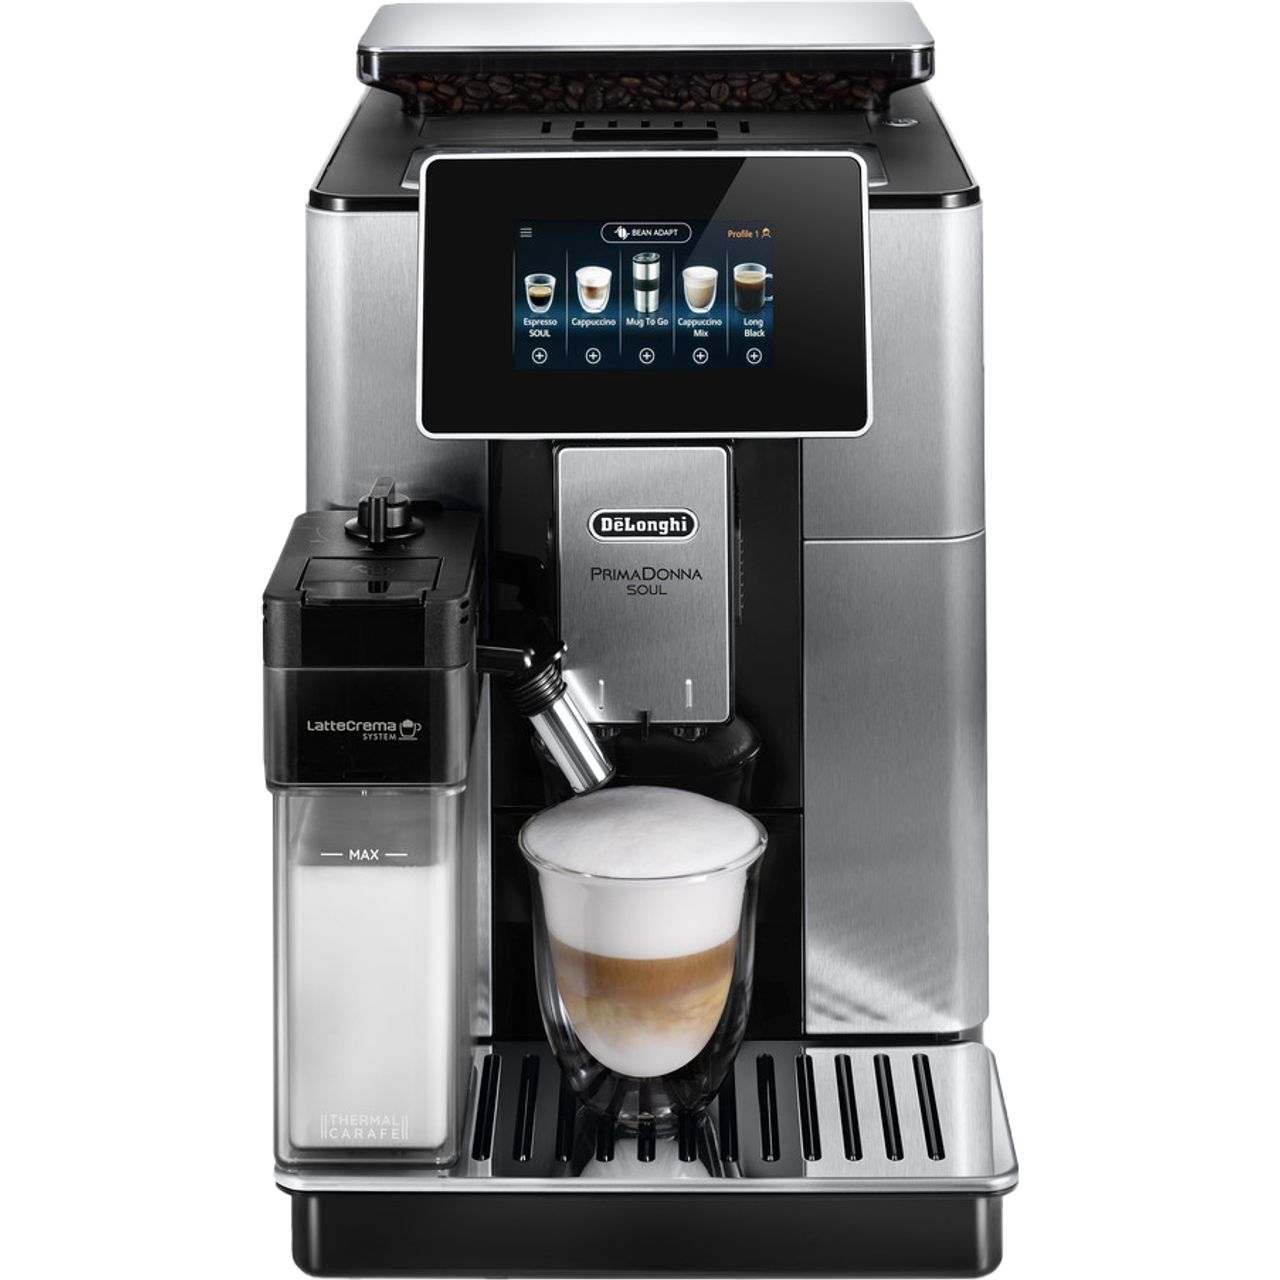 De'Longhi PrimaDonna ECAM610.75.MB Wifi Connected Bean to Cup Coffee Machine Review